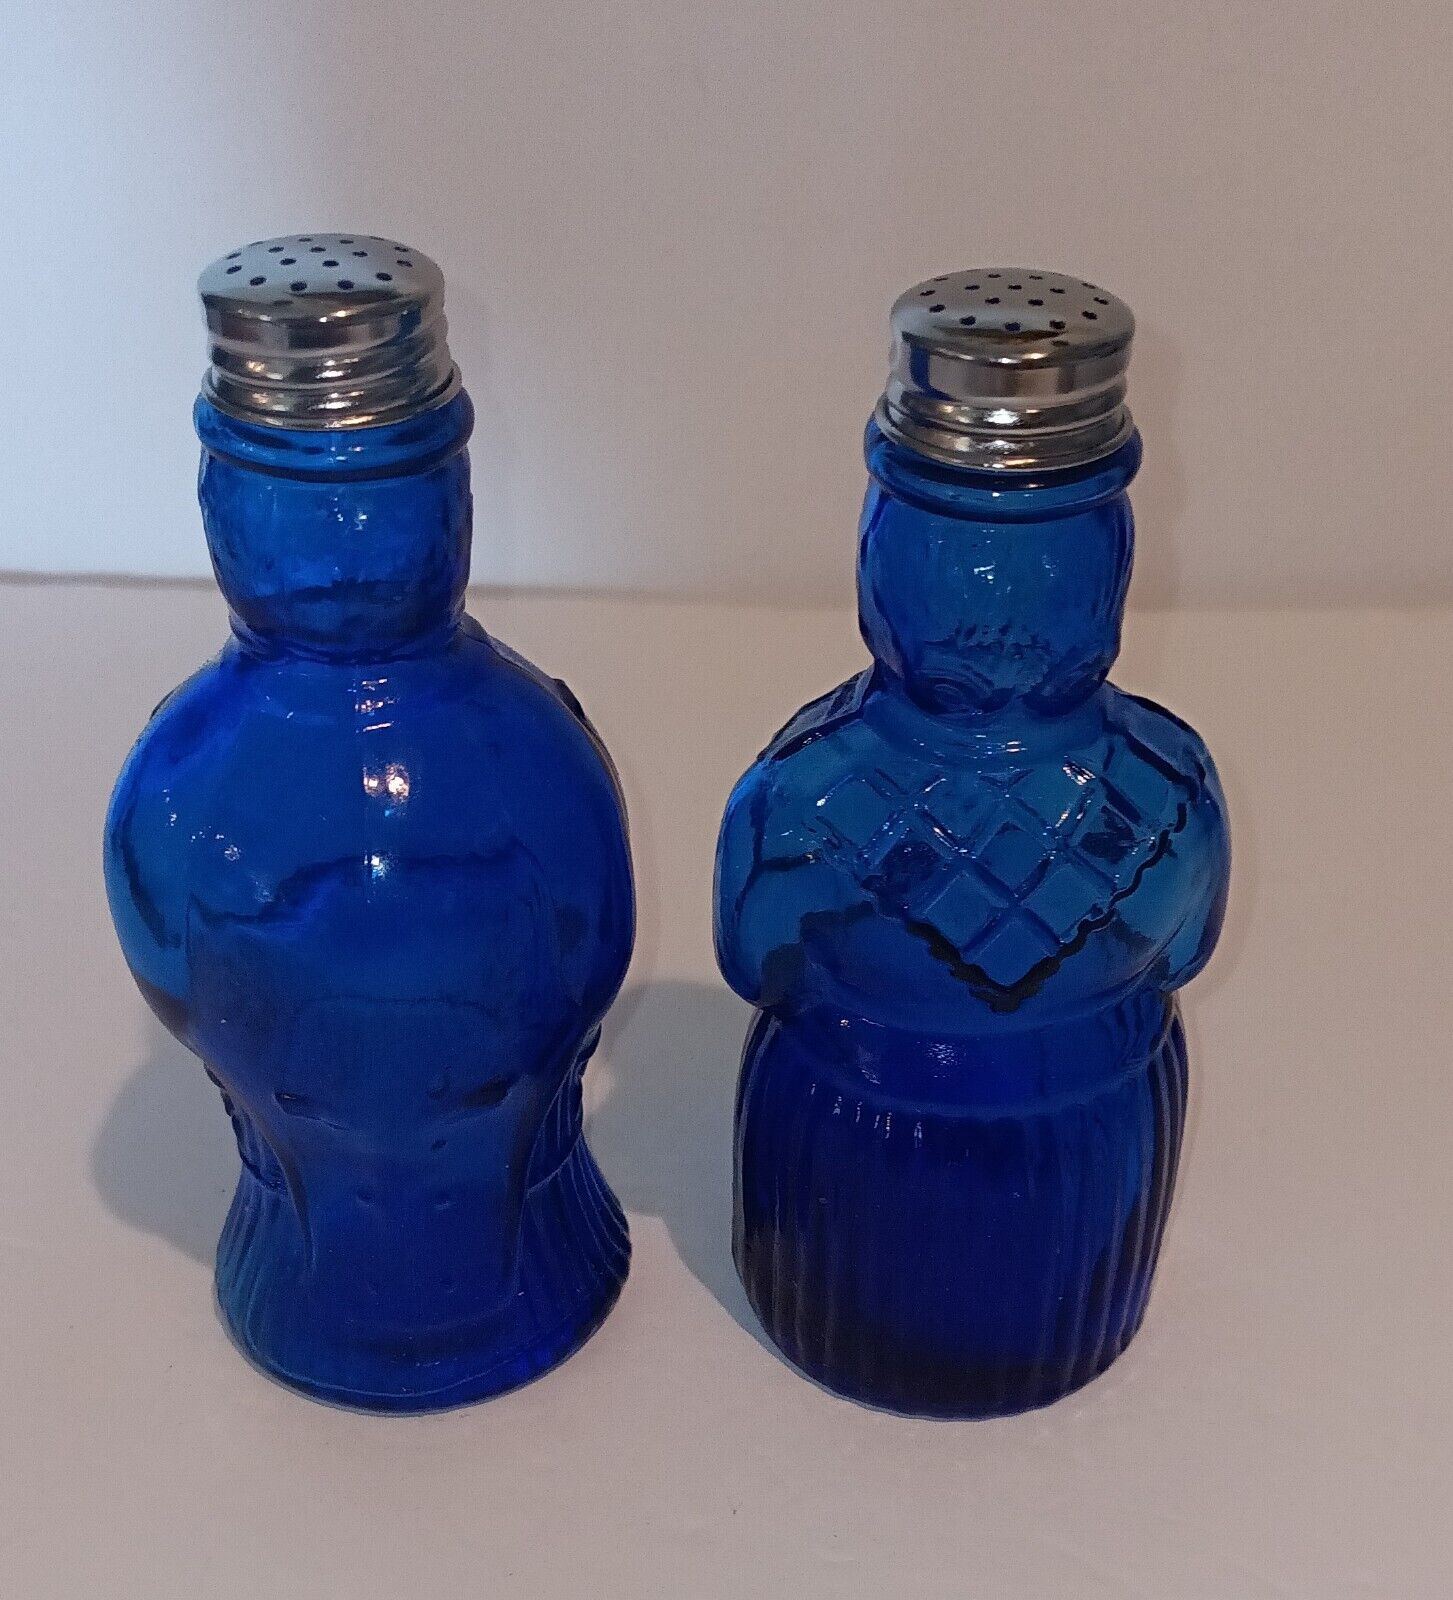 Rare Vintage Cobalt Blue Glass Woman and Man Salt and Pepper Shakers